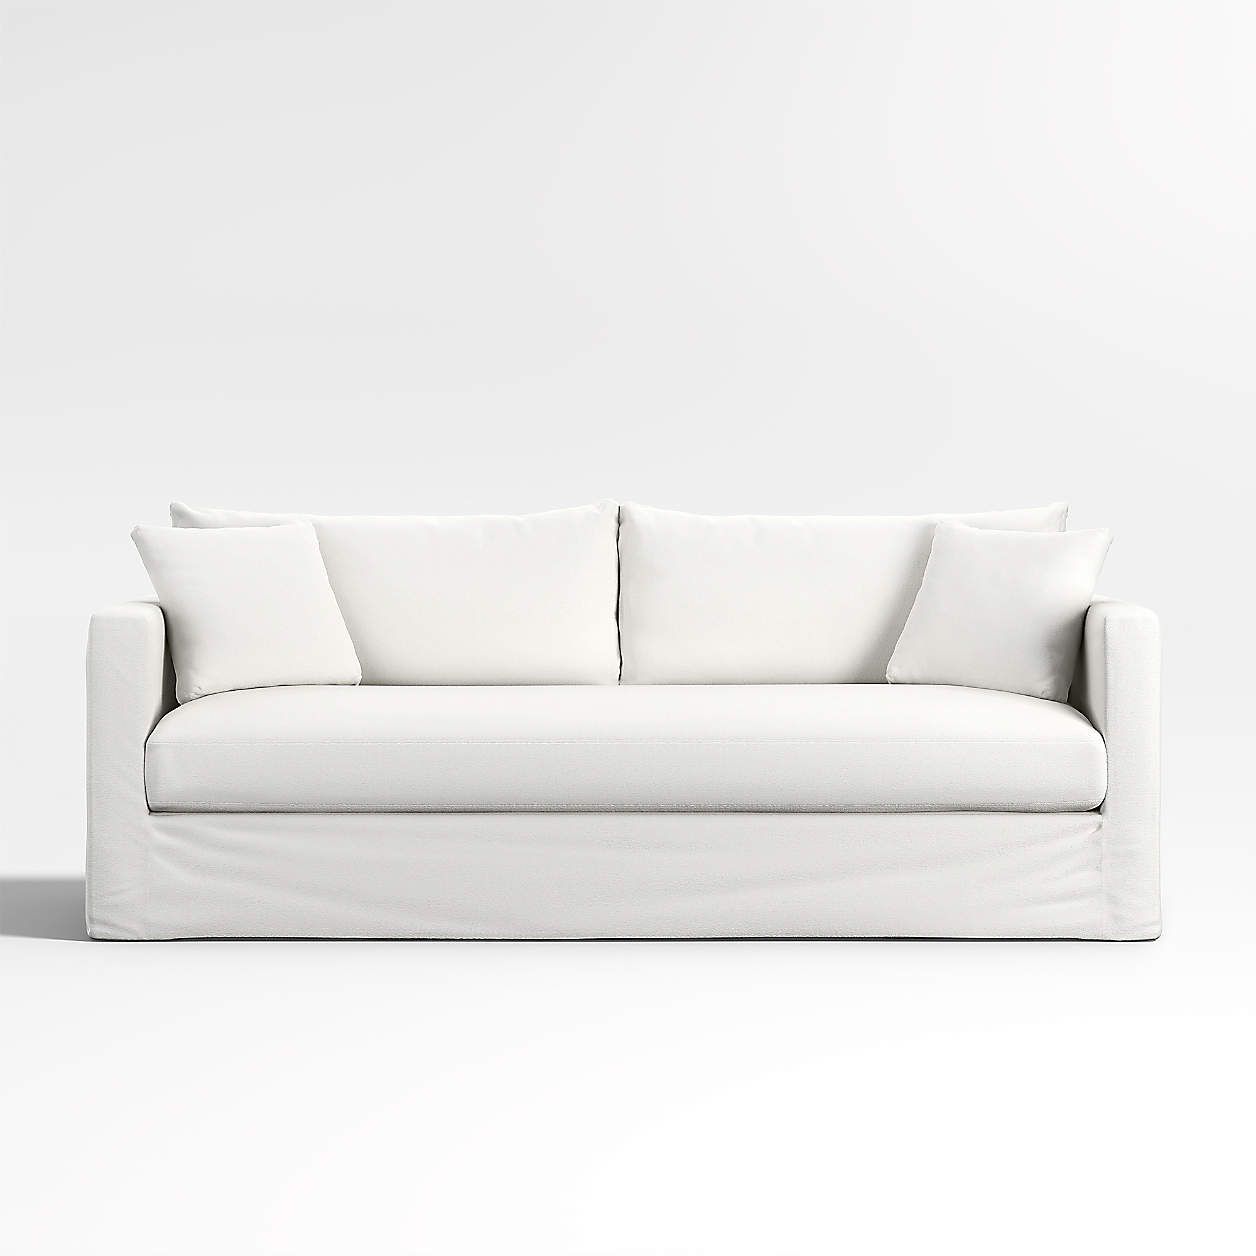 Slipcover Only for Willow II Slipcovered Sofa | Crate & Barrel | Crate & Barrel